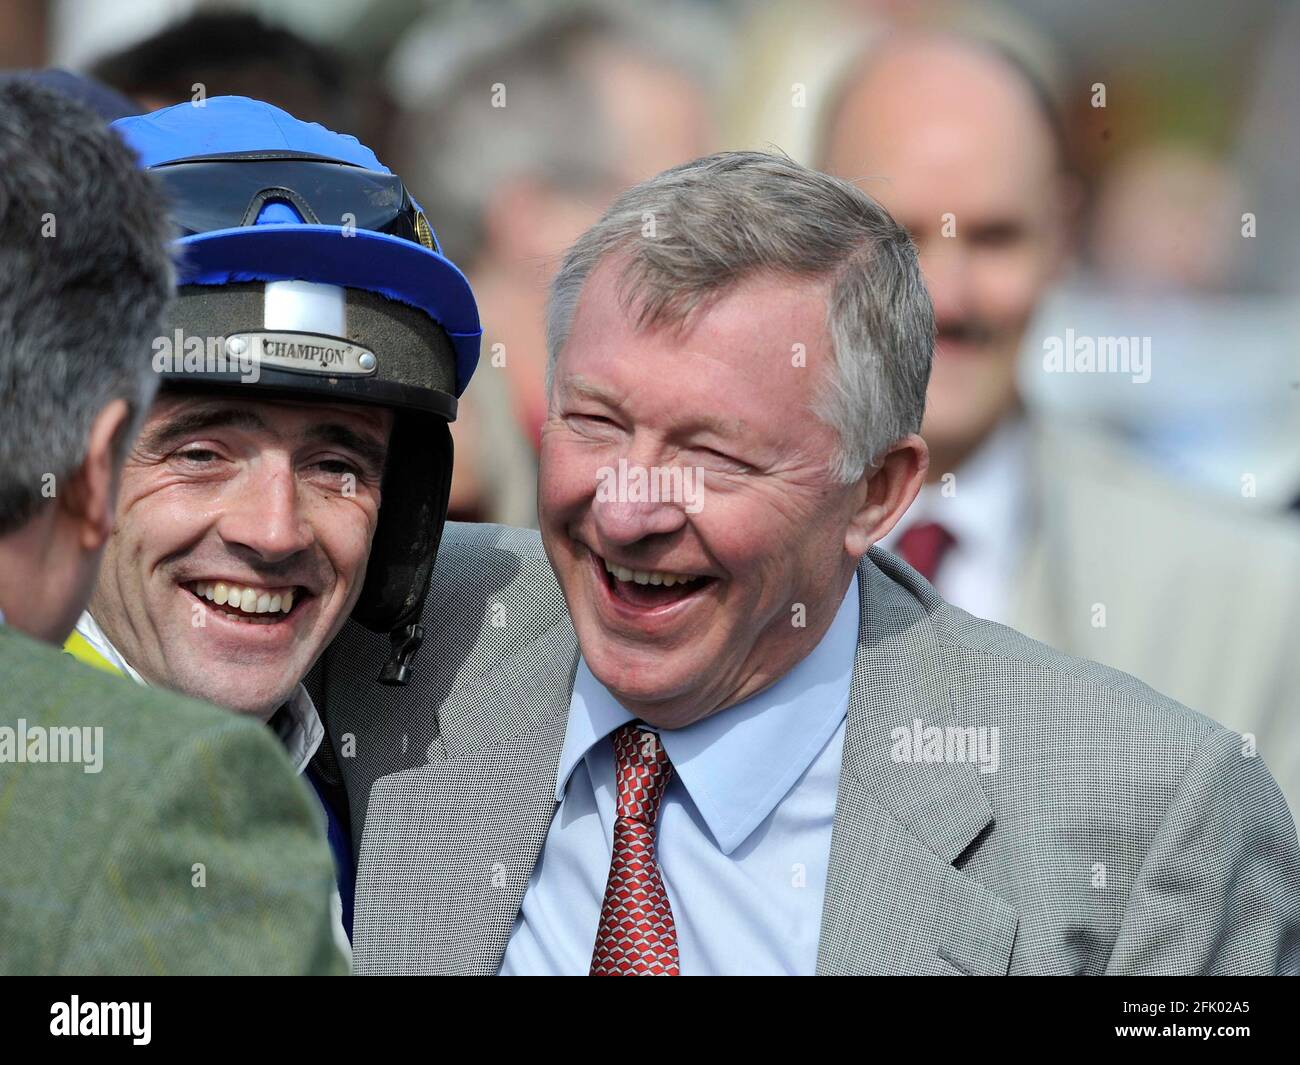 RACING AT AINTREE. 8/4/2010. THE TOTESPORT BOWL CHASE. WINNER RUBY WALSH ON WHAT A FRIEND with owner sir alex ferguson. . PICTURE DAVID ASHDOWN Stock Photo